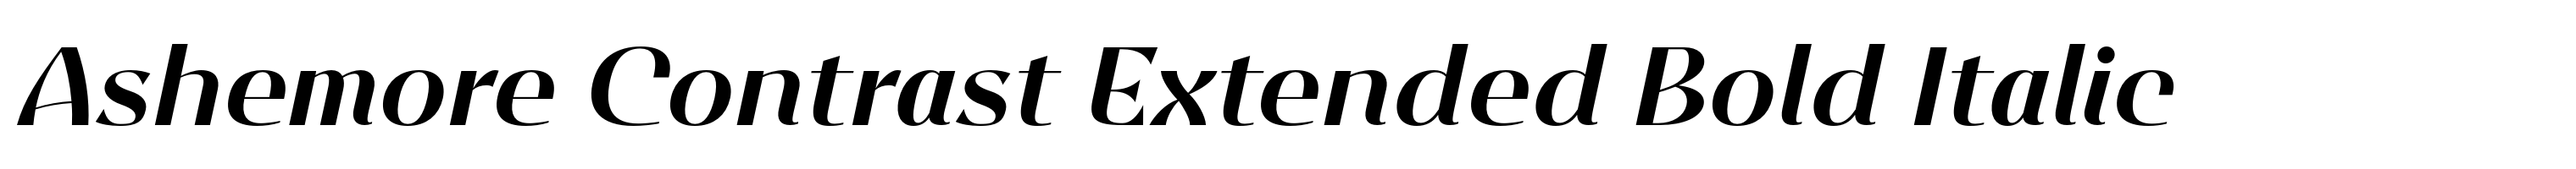 Ashemore Contrast Extended Bold Italic